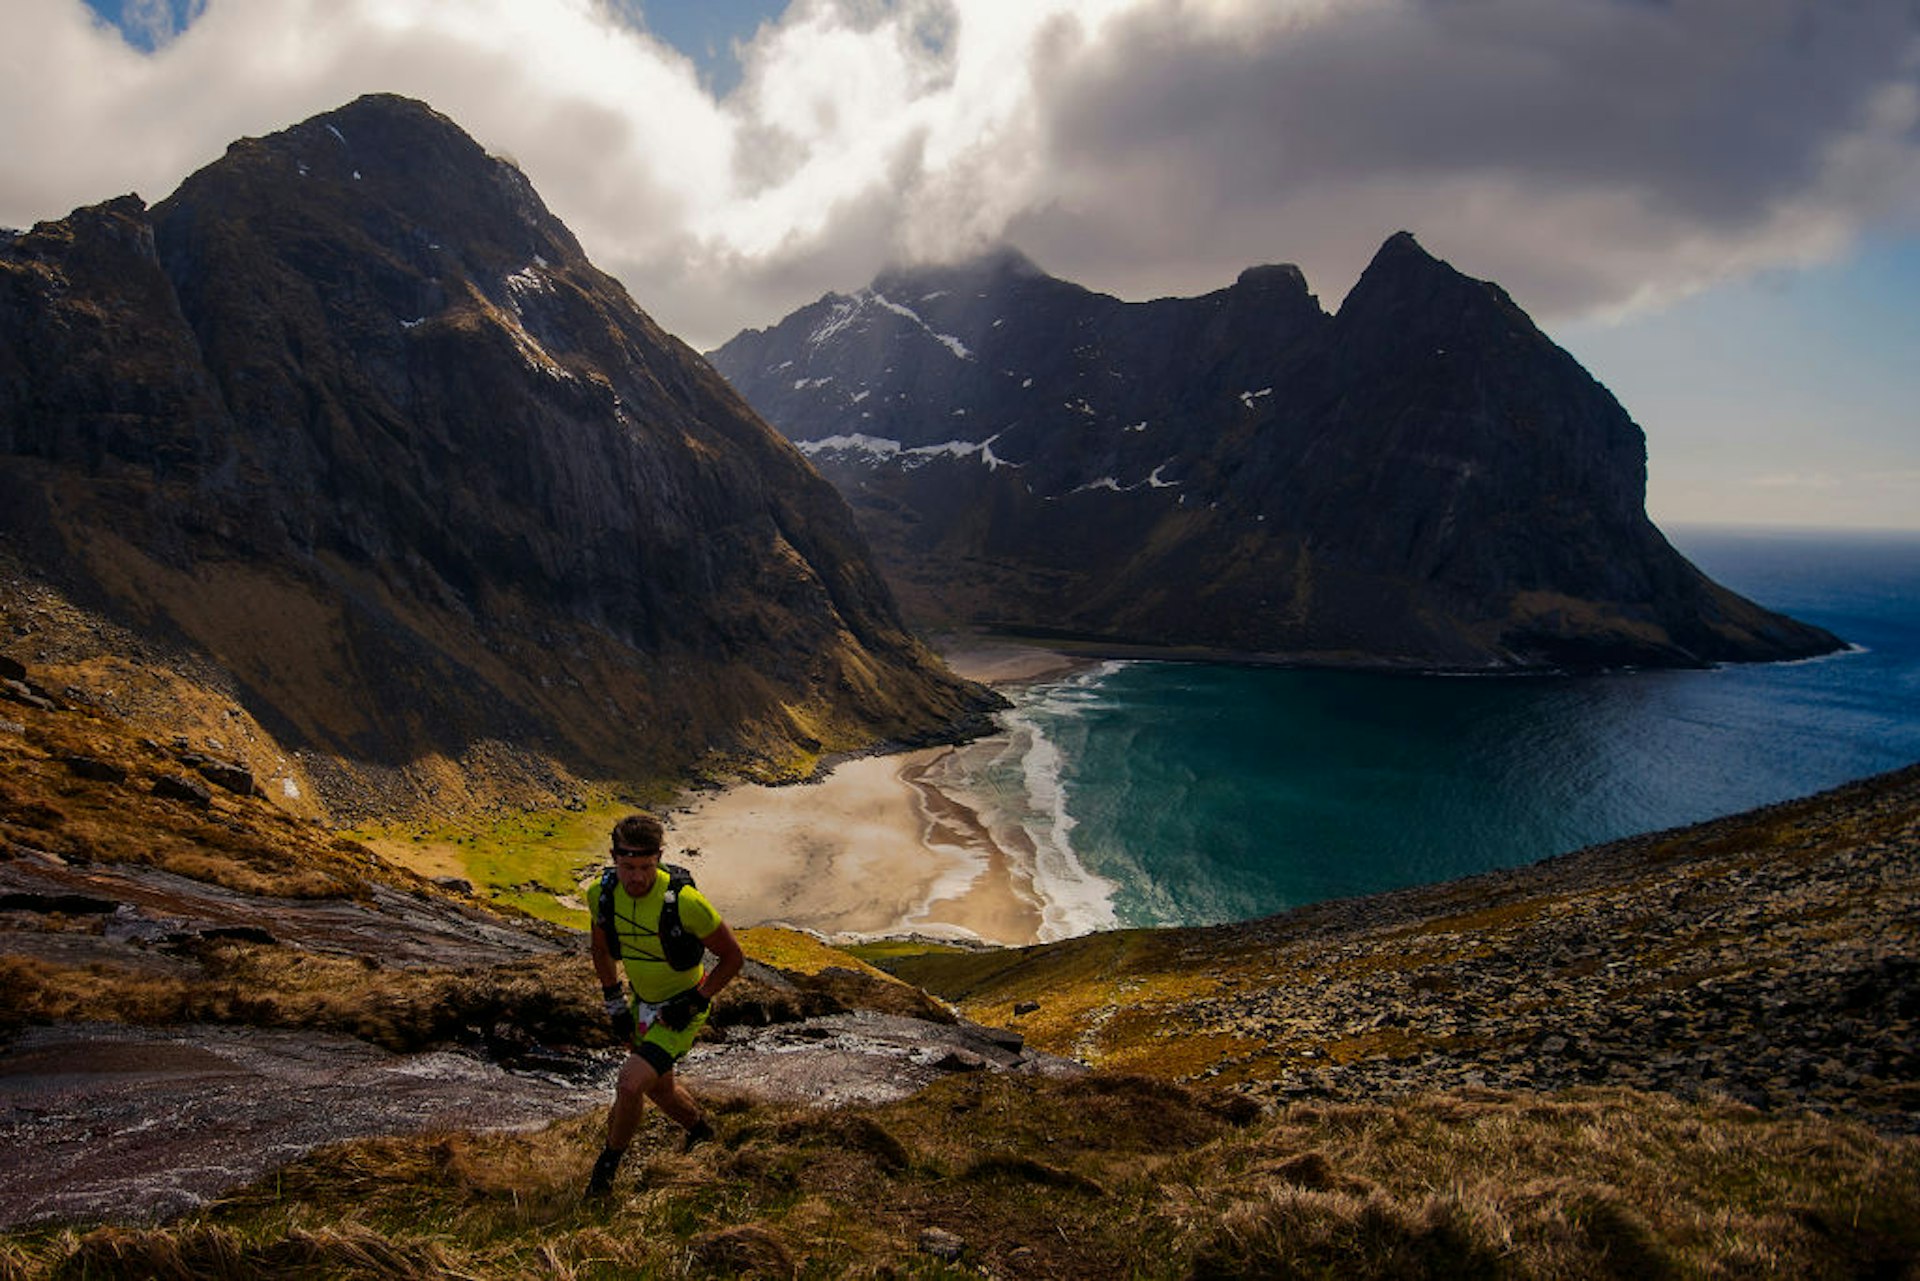 A hiker in bright yellow clothes climbs up the mountainside with Kvalvika Beach, Lofoten Islands, in the background.